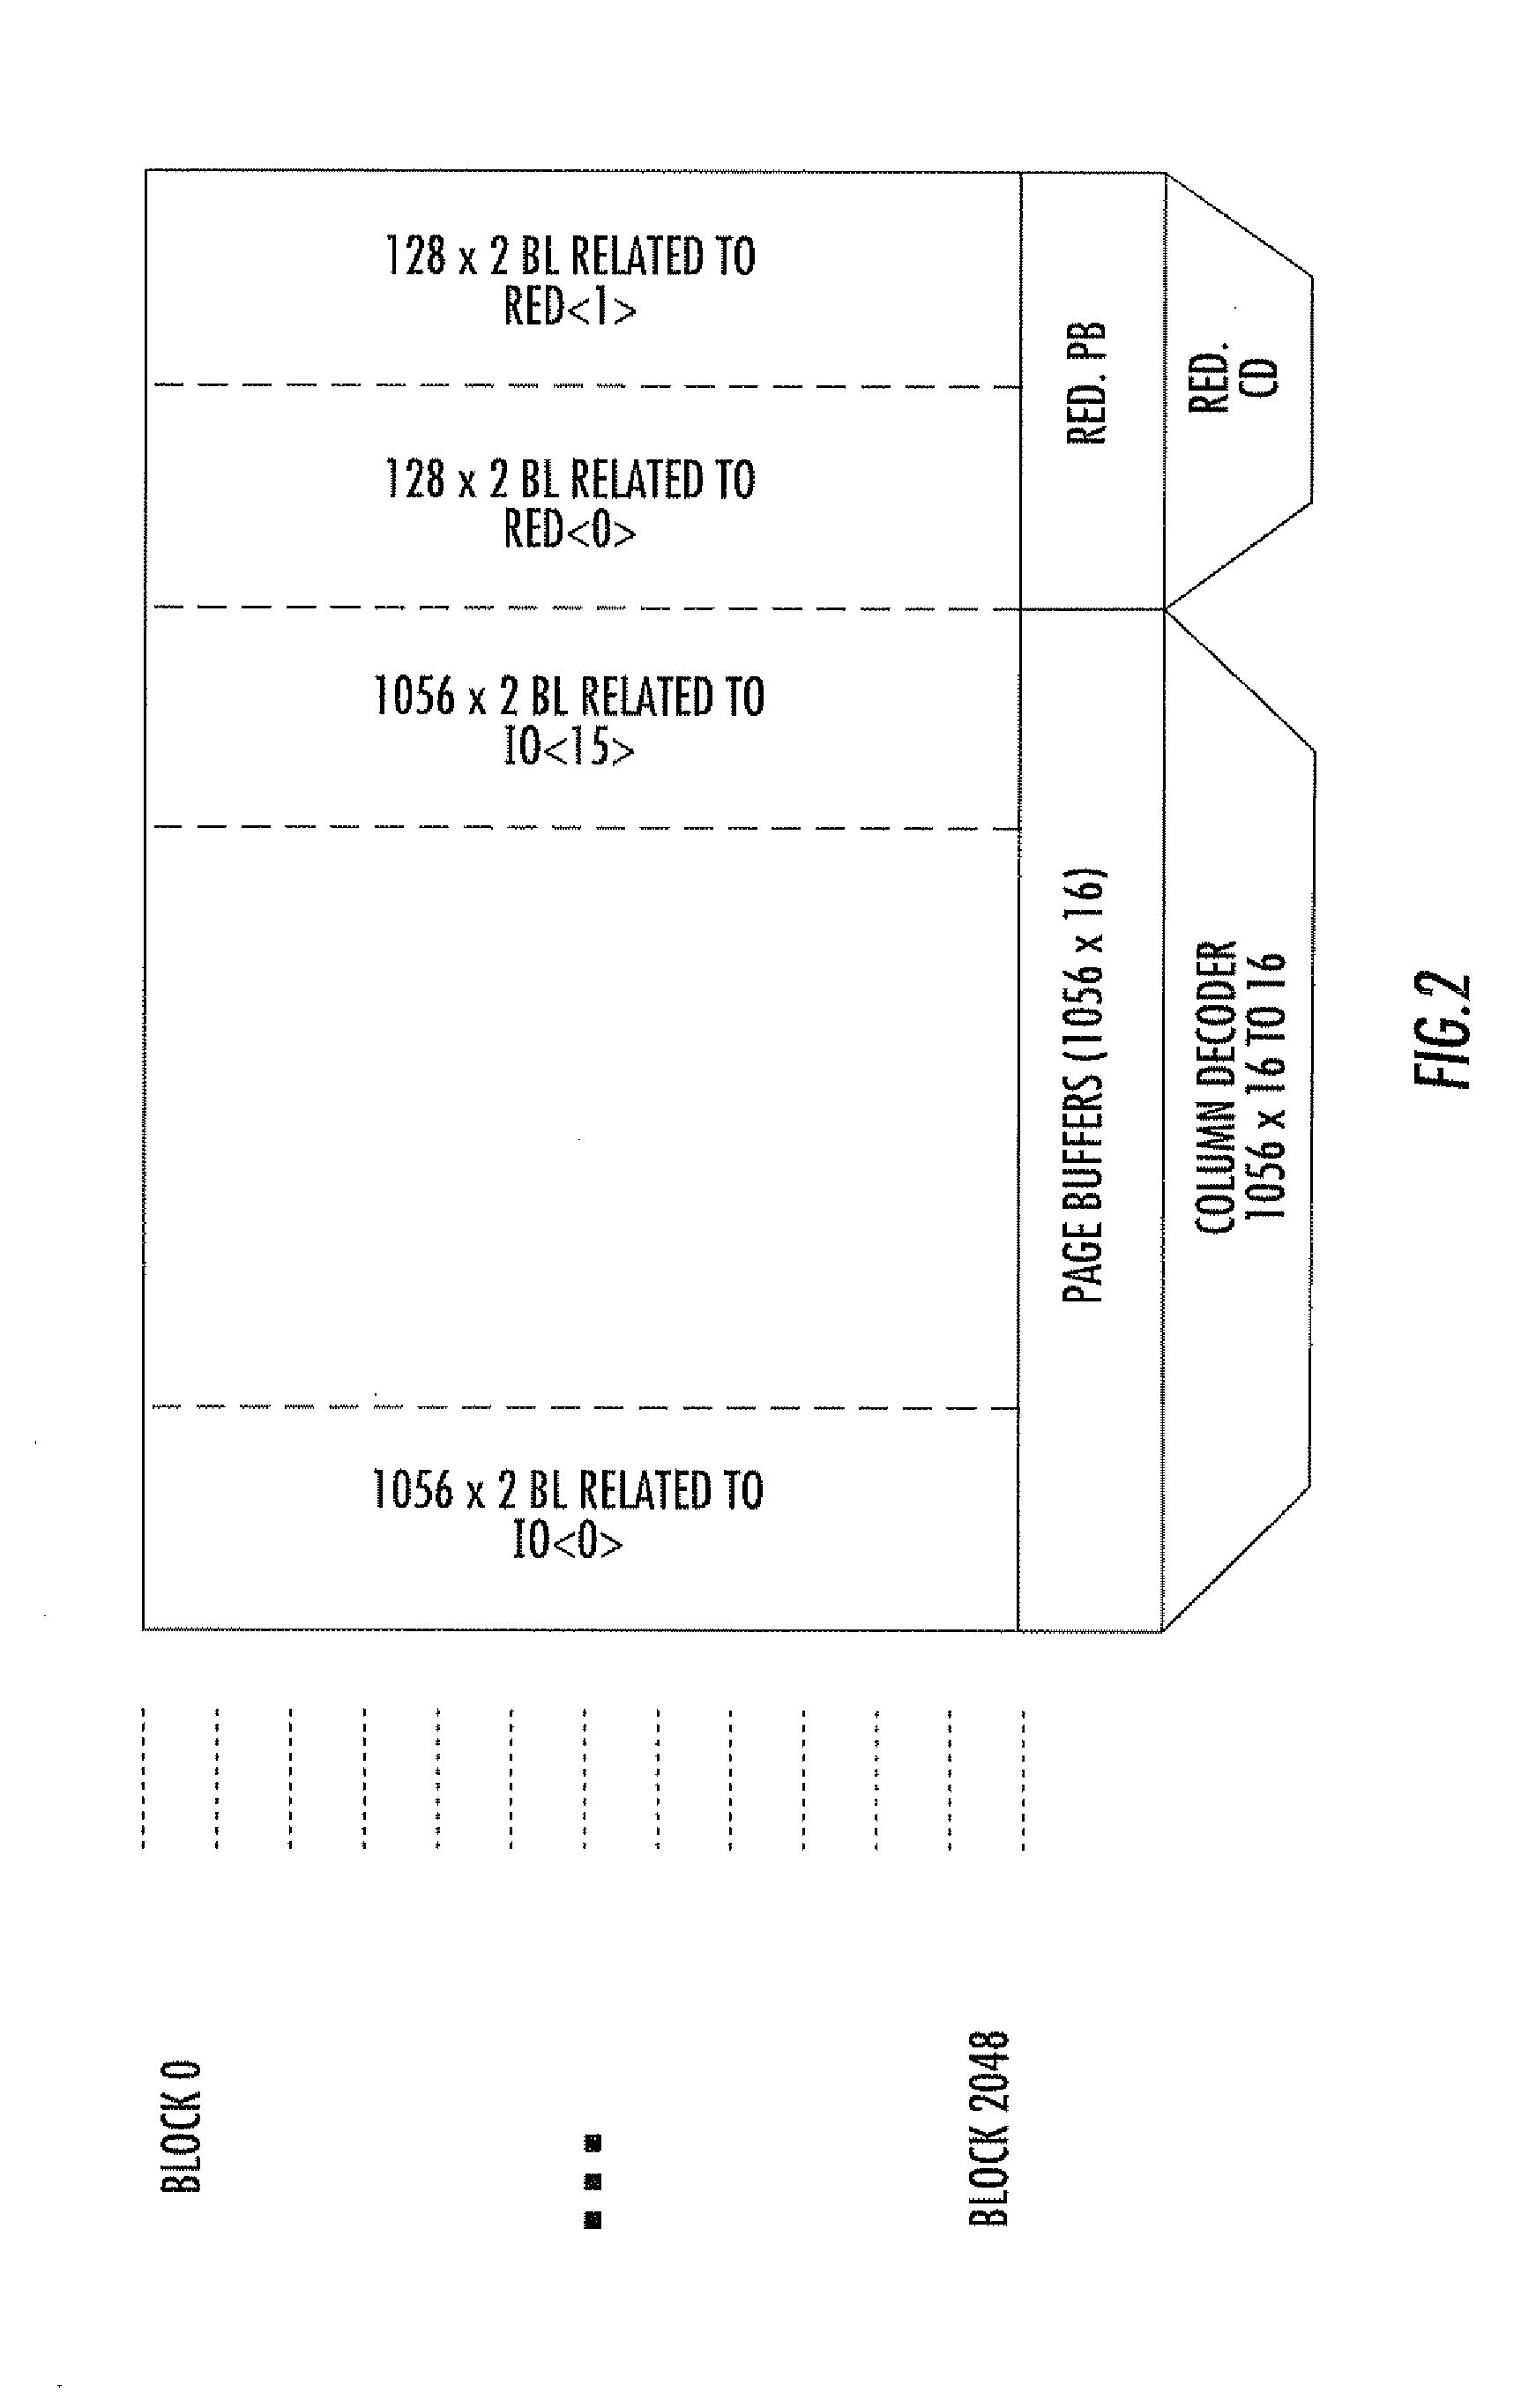 NAND flash memory device with ecc protected reserved area for non-volatile storage of redundancy data